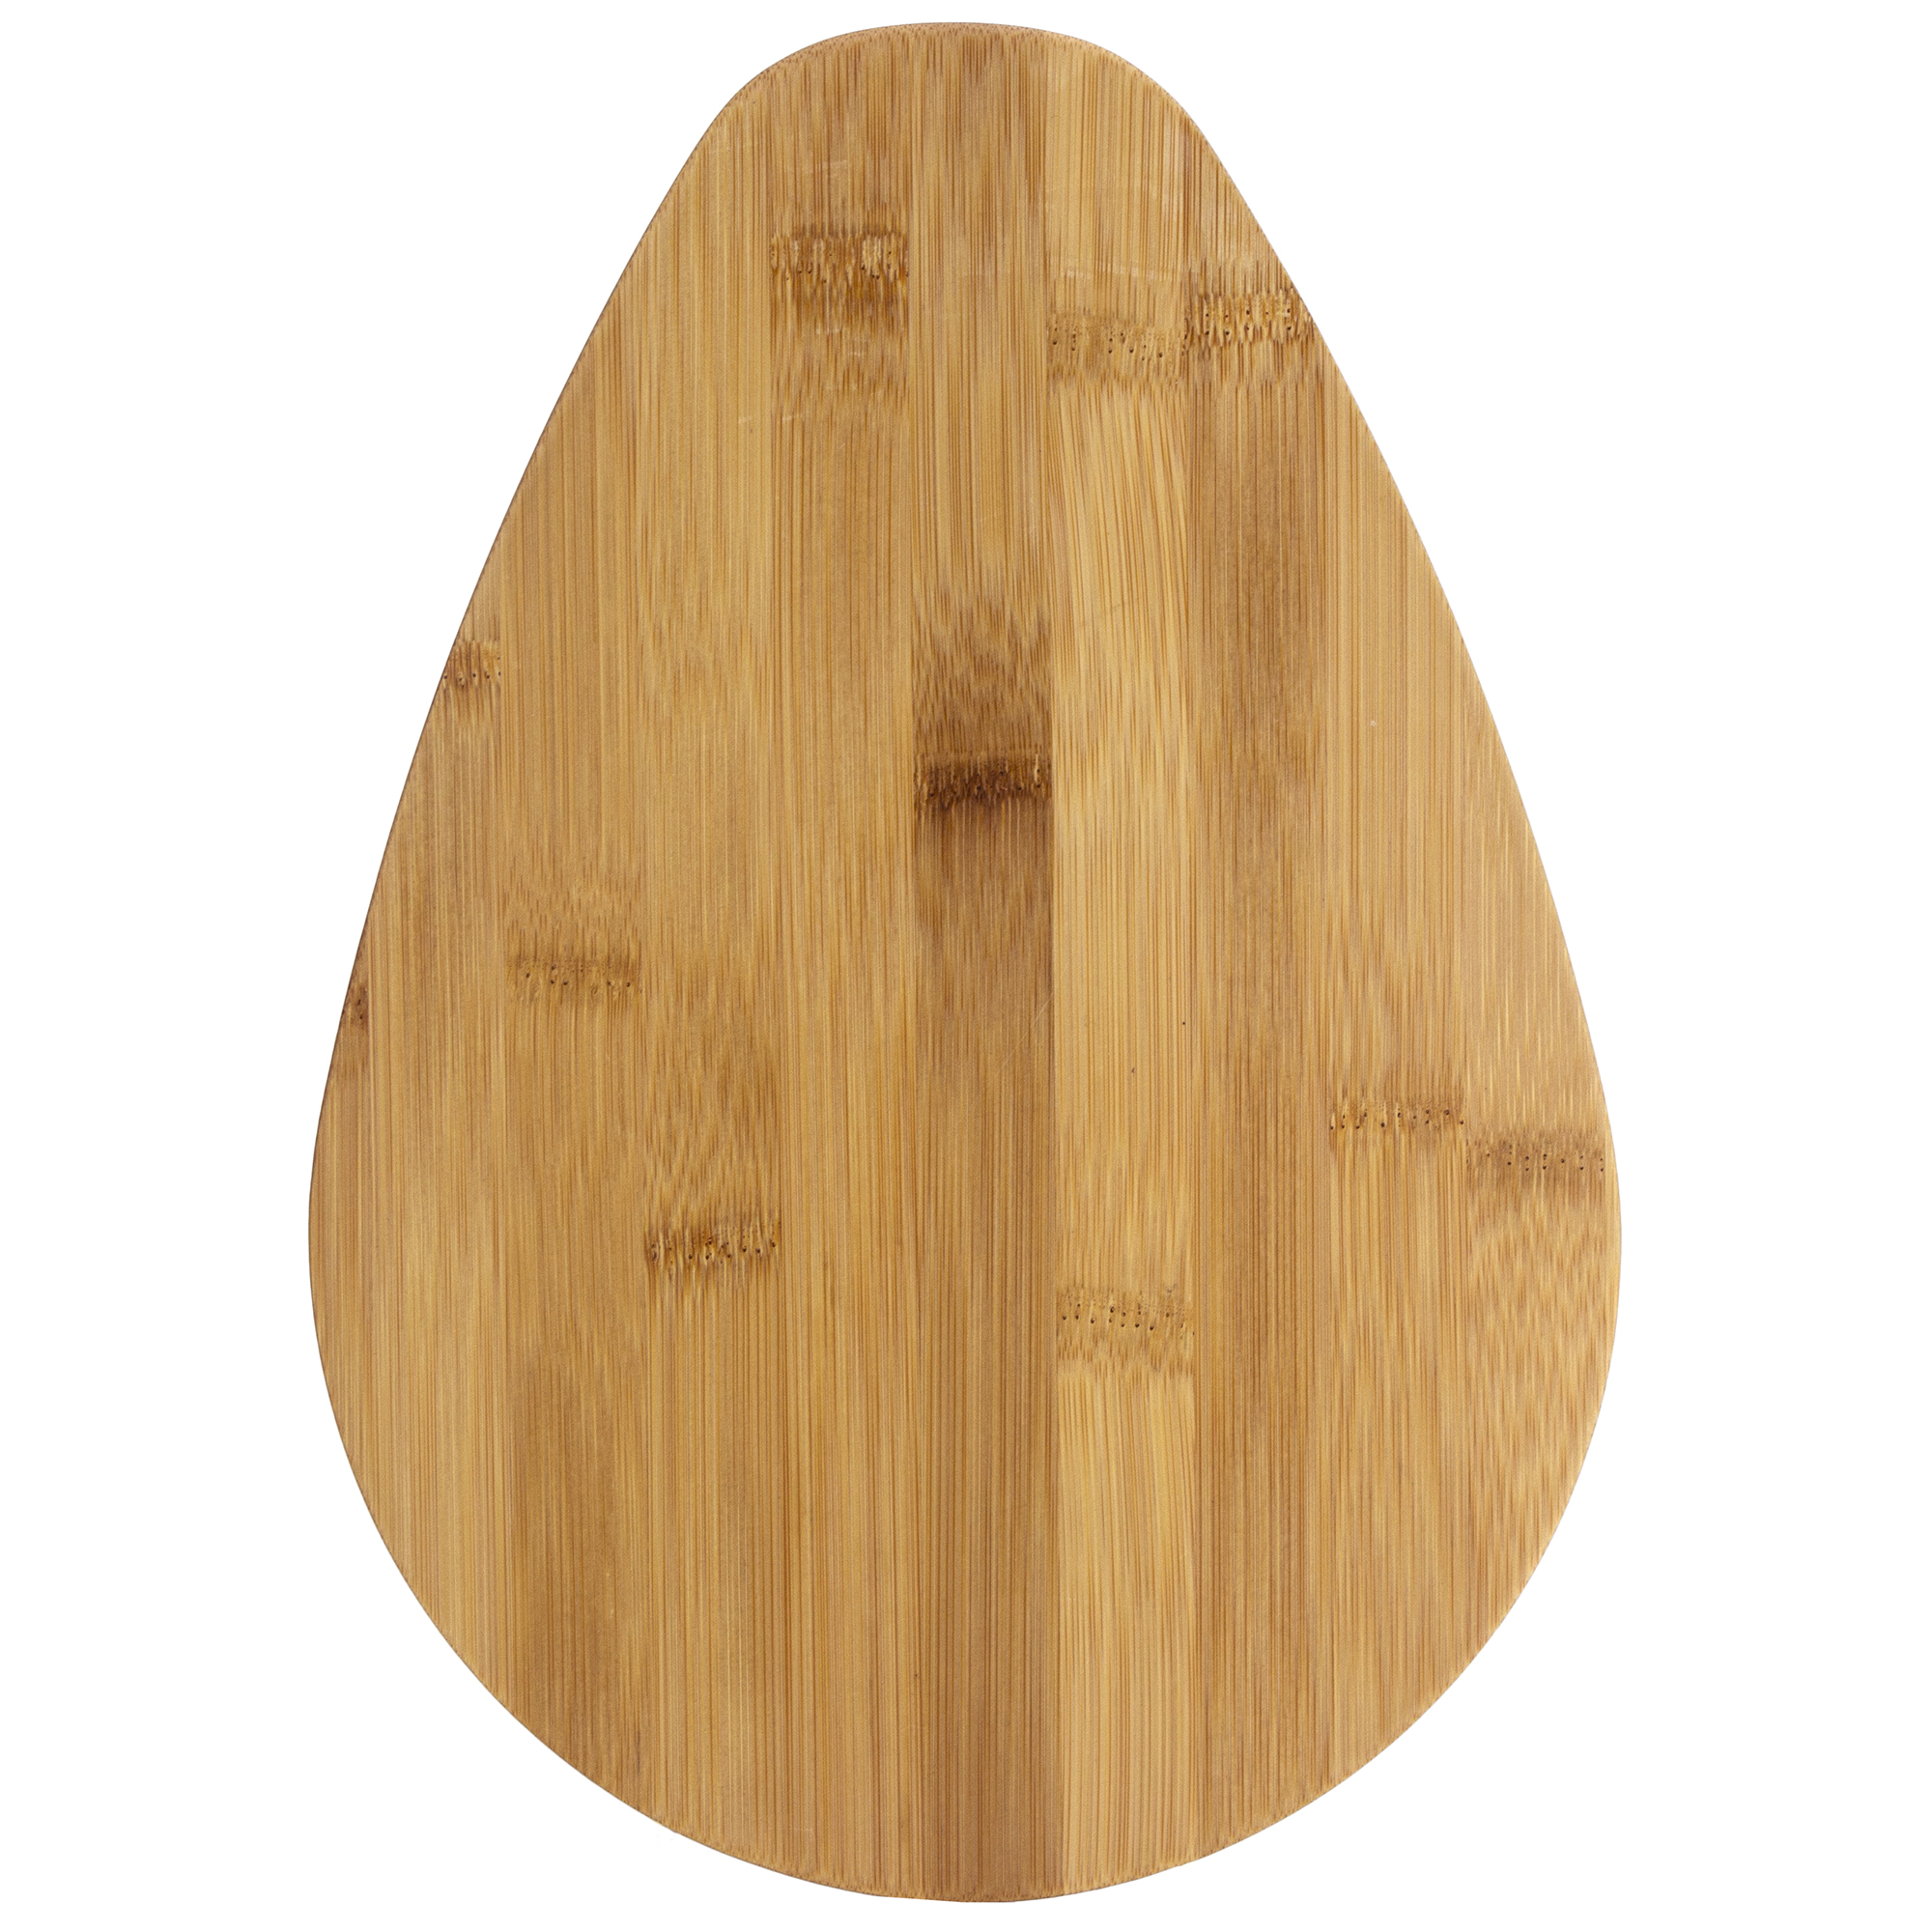 Totally Bamboo Avocado Obsession Eco-Friendly Serving and Cutting Board, Medium - image 4 of 5